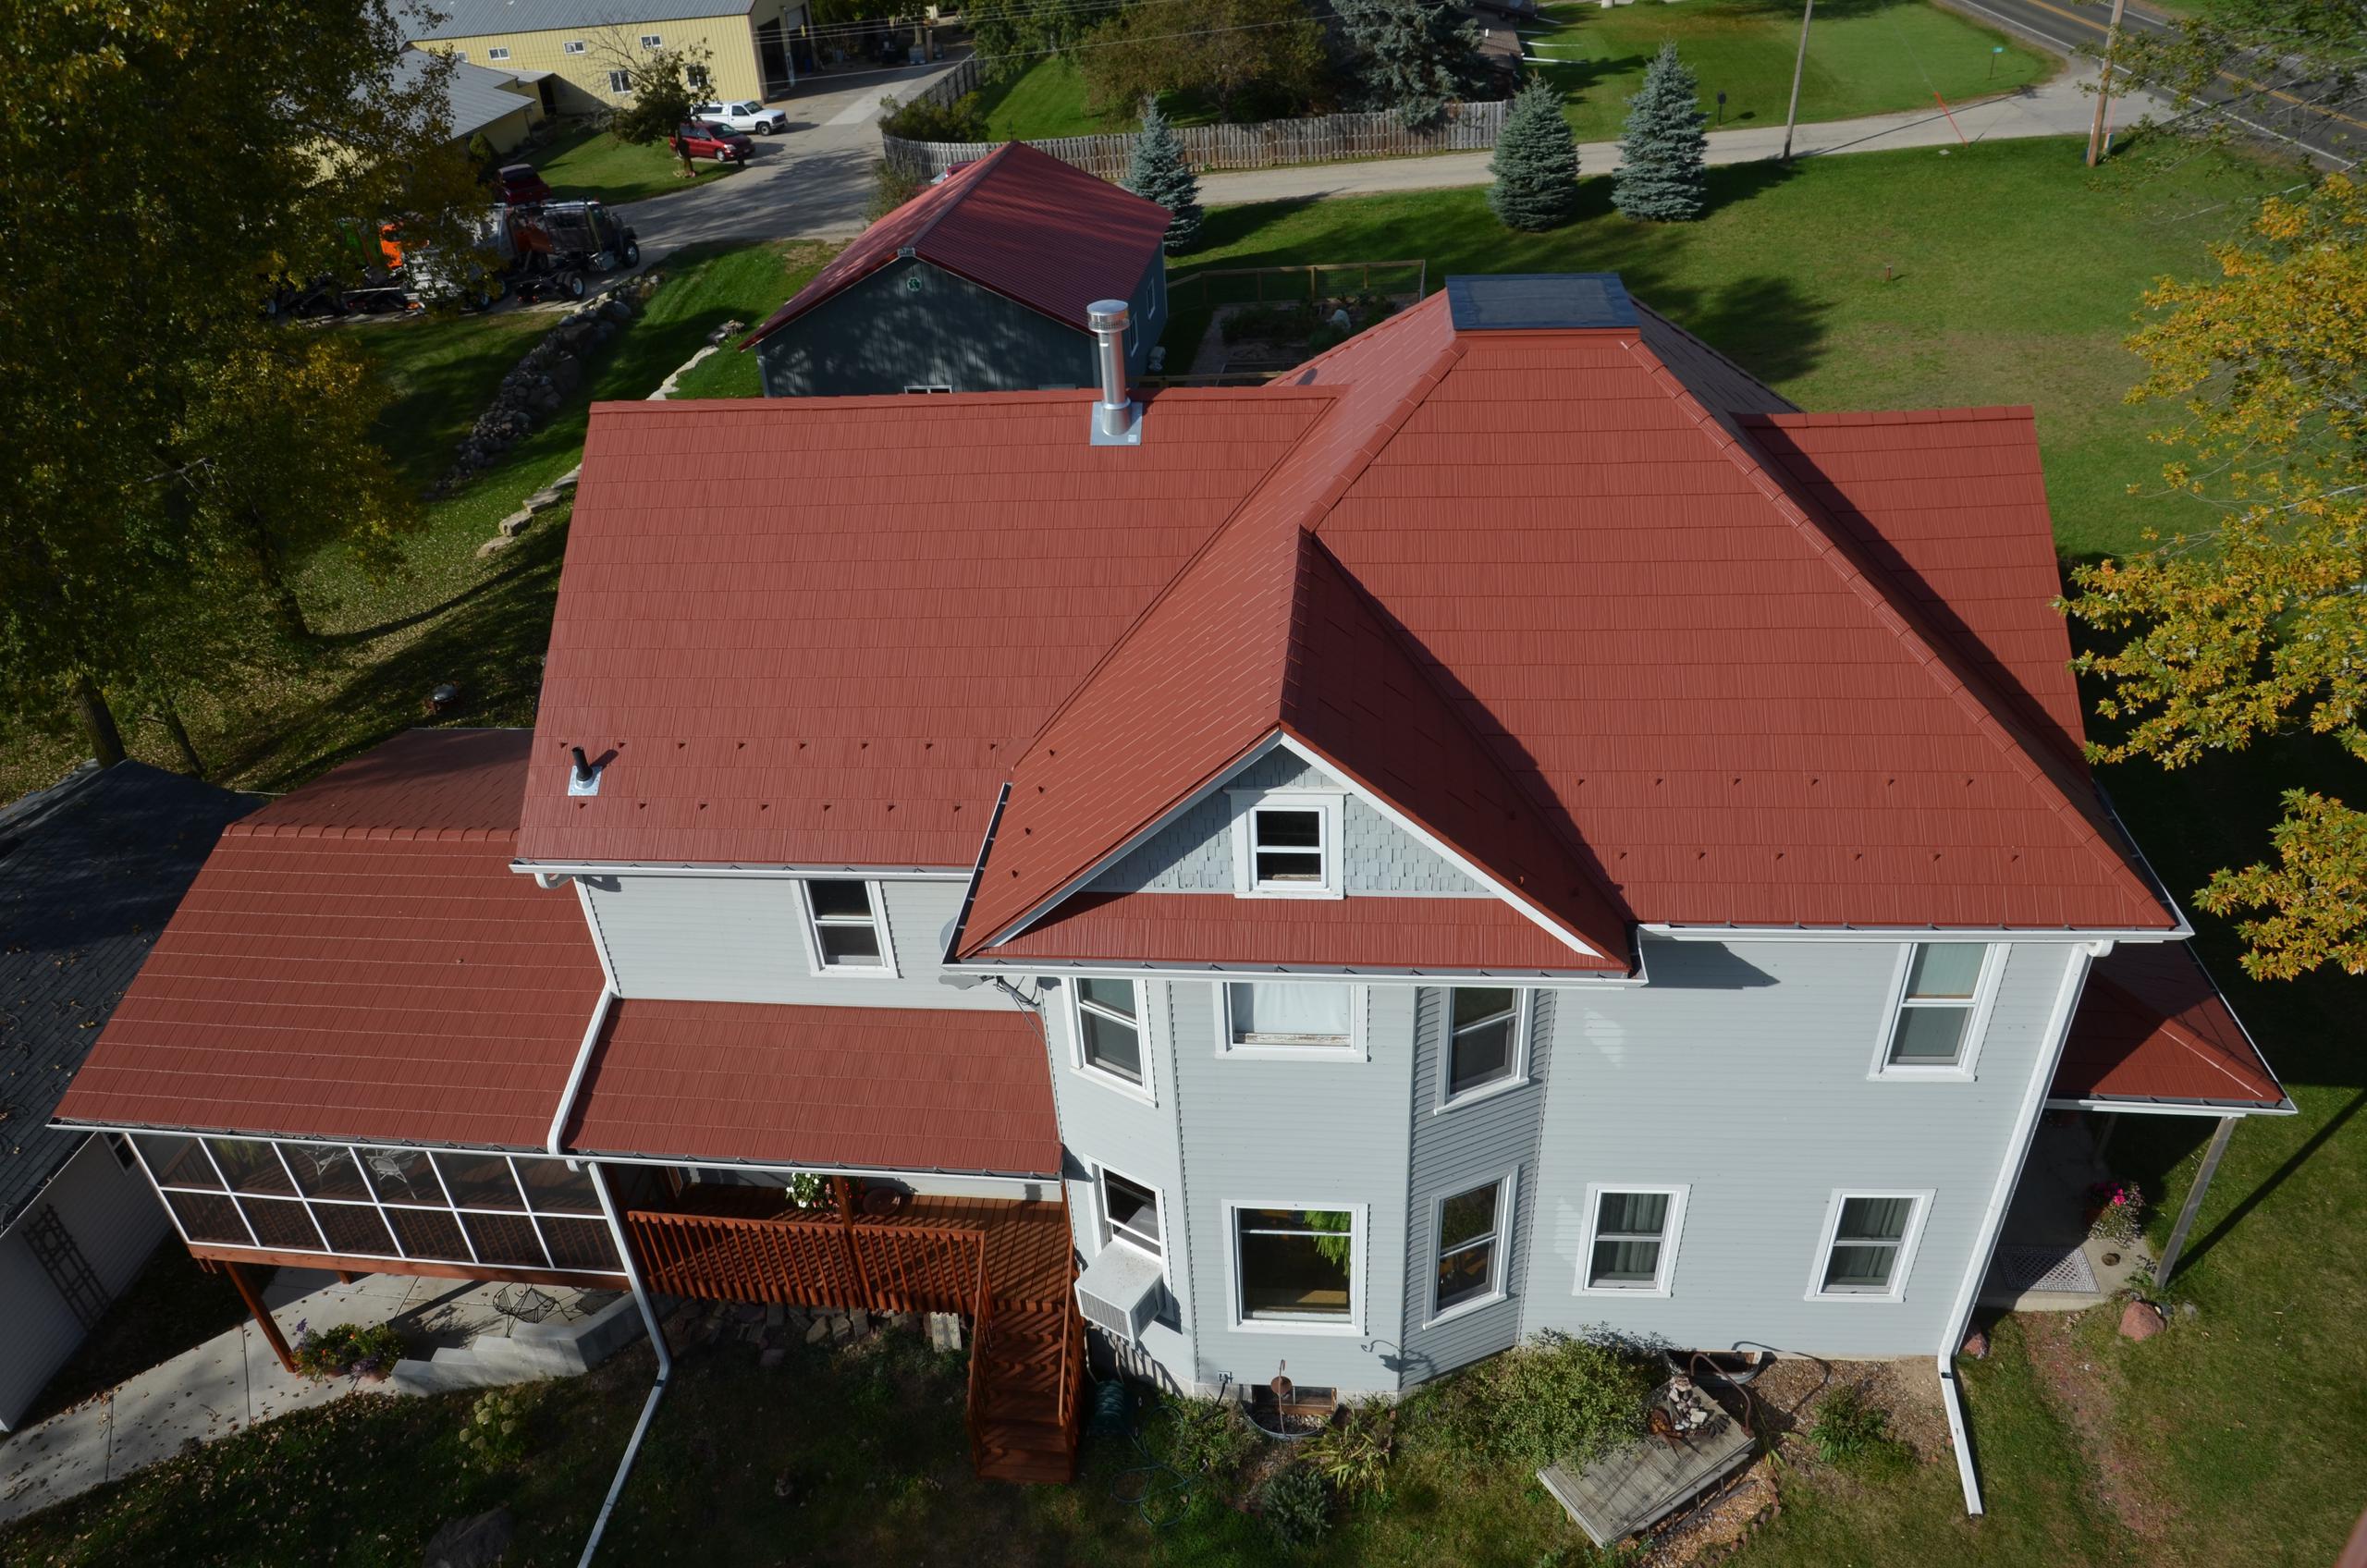 Arrowline Shake Classic Red Roofing from EDCO was installed on this home in Wisconsin because of the natural look and architectural detail of hand-split shakes.